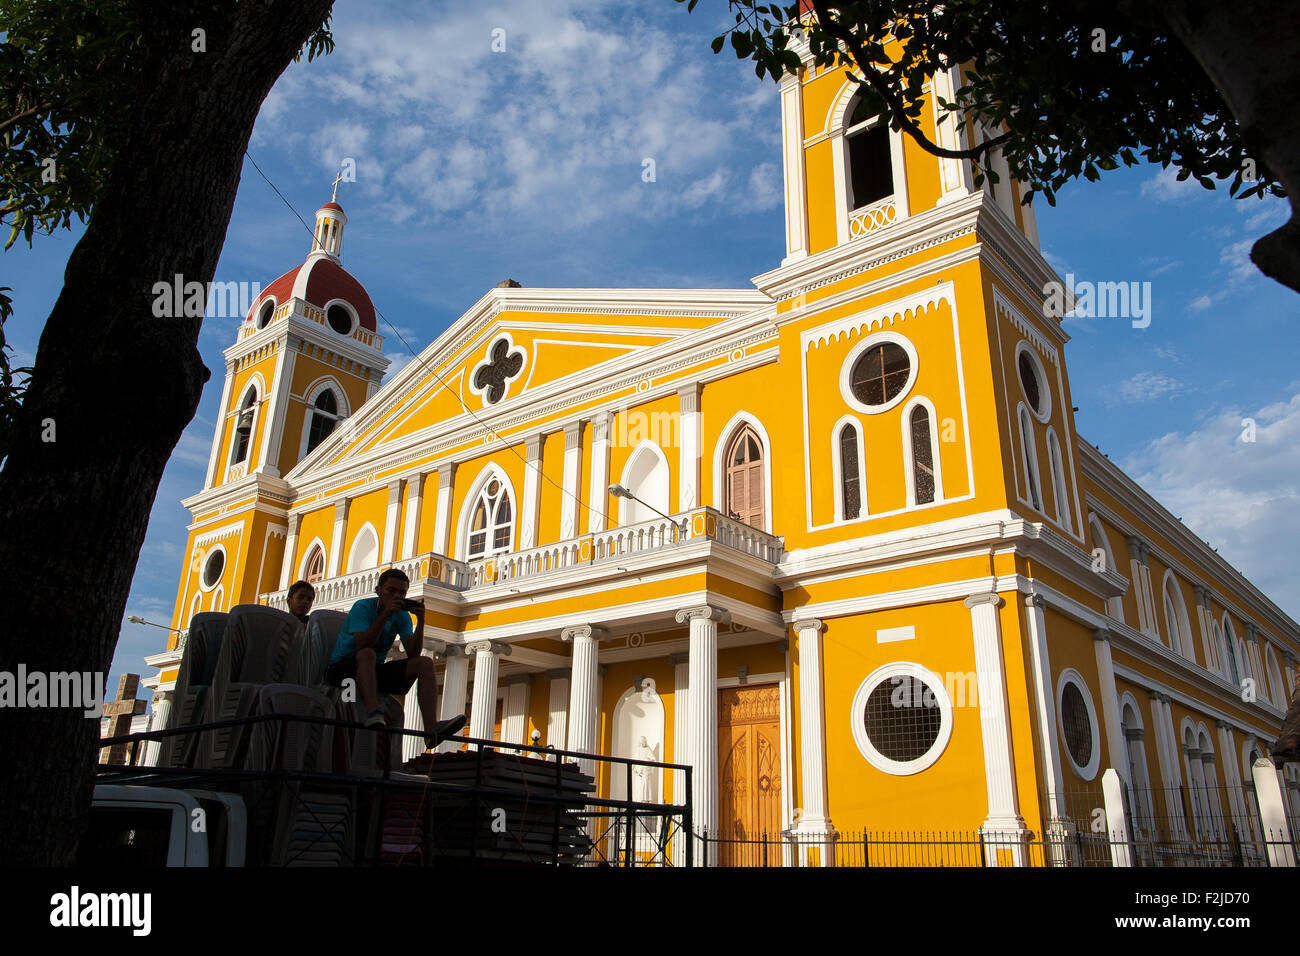 A boy is silhouetted against the famous and colorful cathedral of Granada on the main plaza or square in Grenada Nicaragua Stock Photo